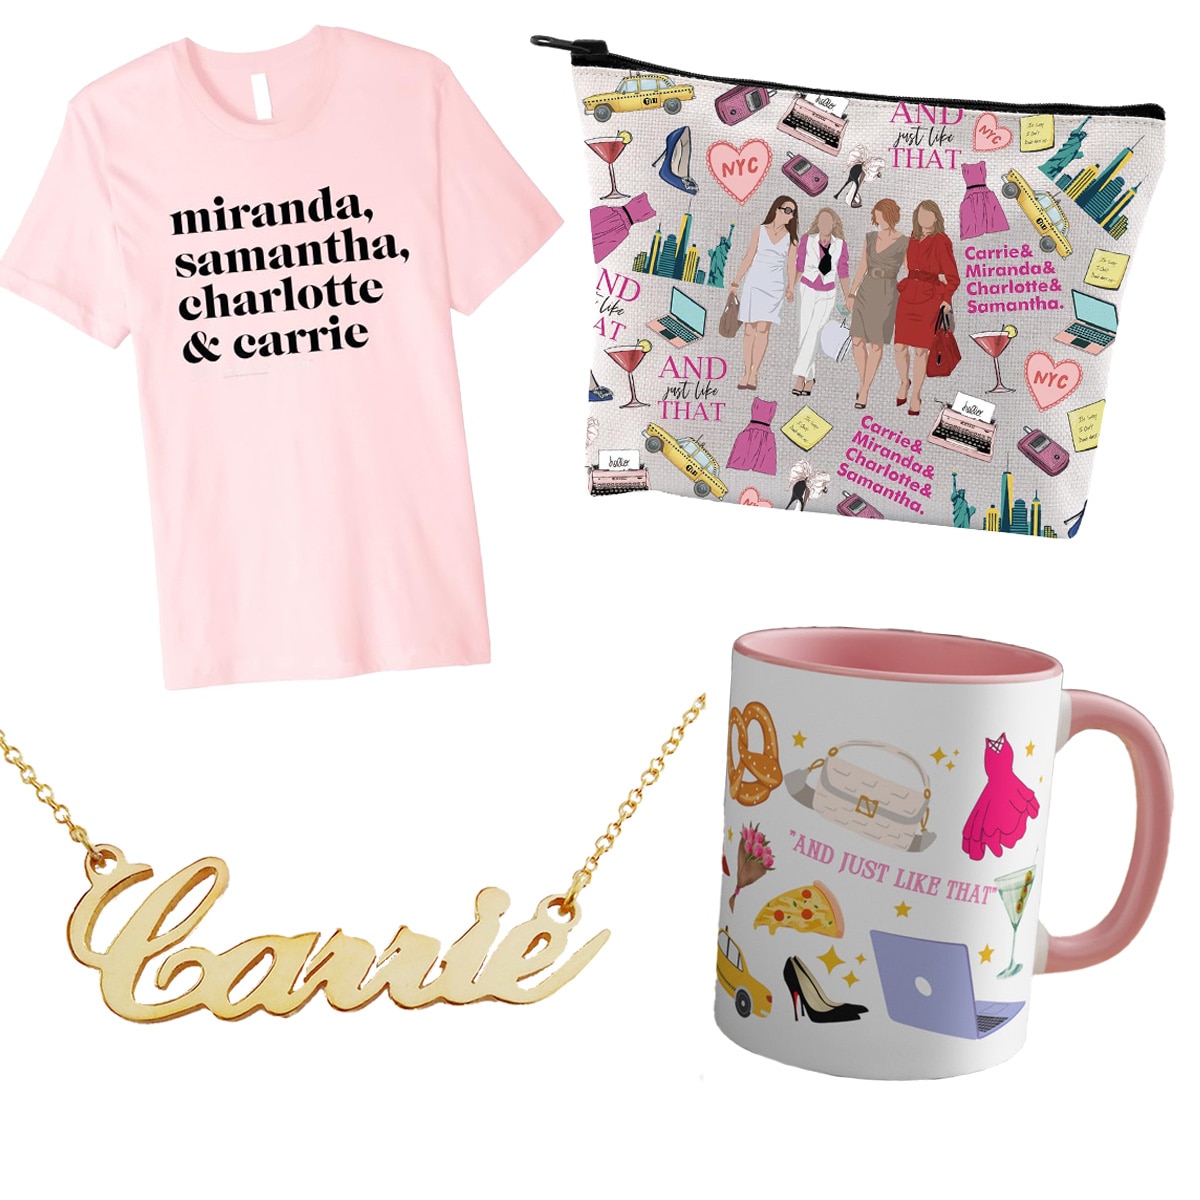 Ecomm, E! Insider Shop: Sex and the City Gift Guide